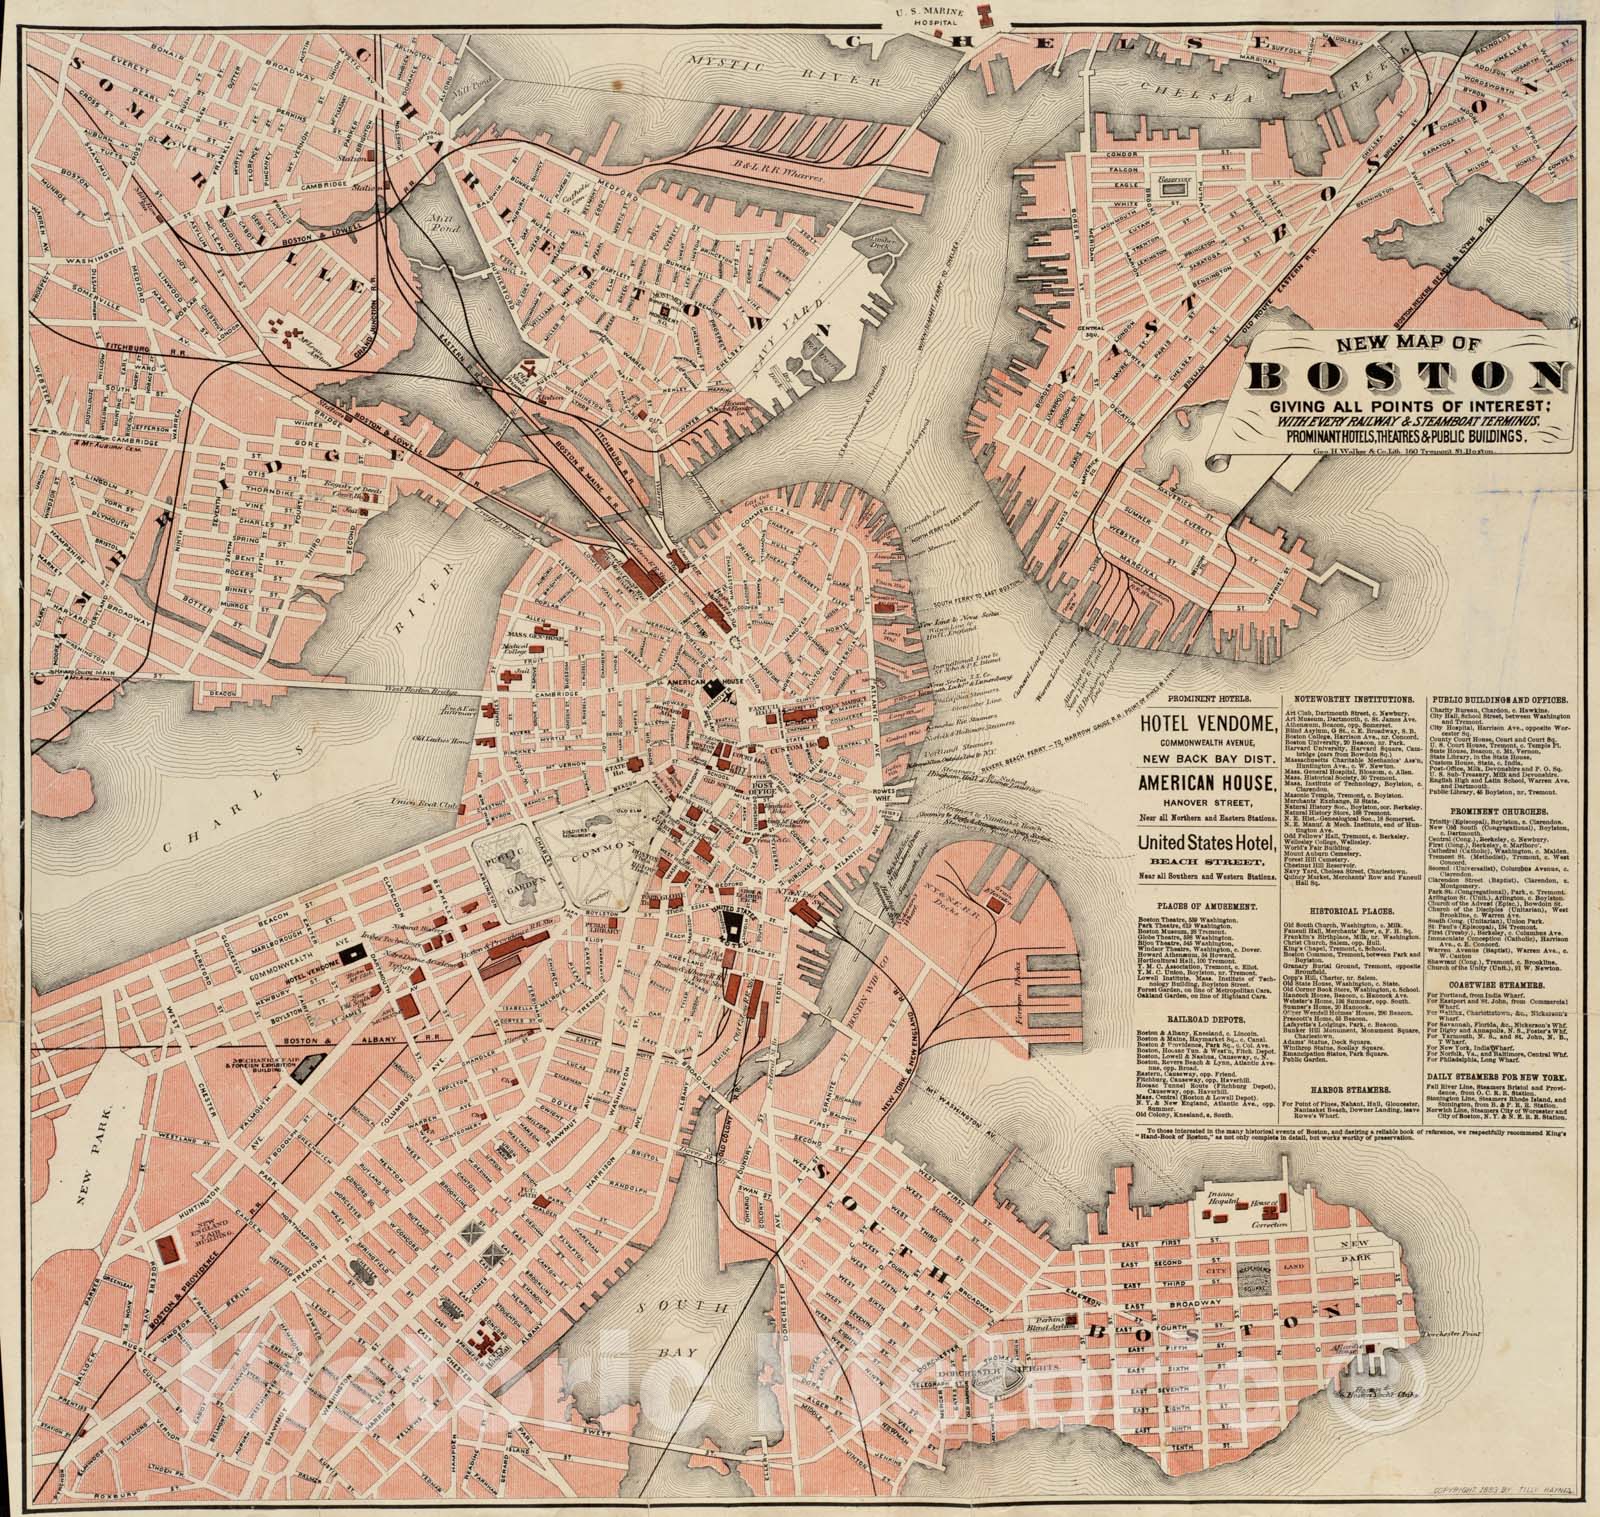 Historical Map, c.1883 New map of Boston Giving All Points of Interest : with Every Railway & Steamboat Terminus, Prominent Hotels, theatres & Public Buildings, Vintage Wall Art